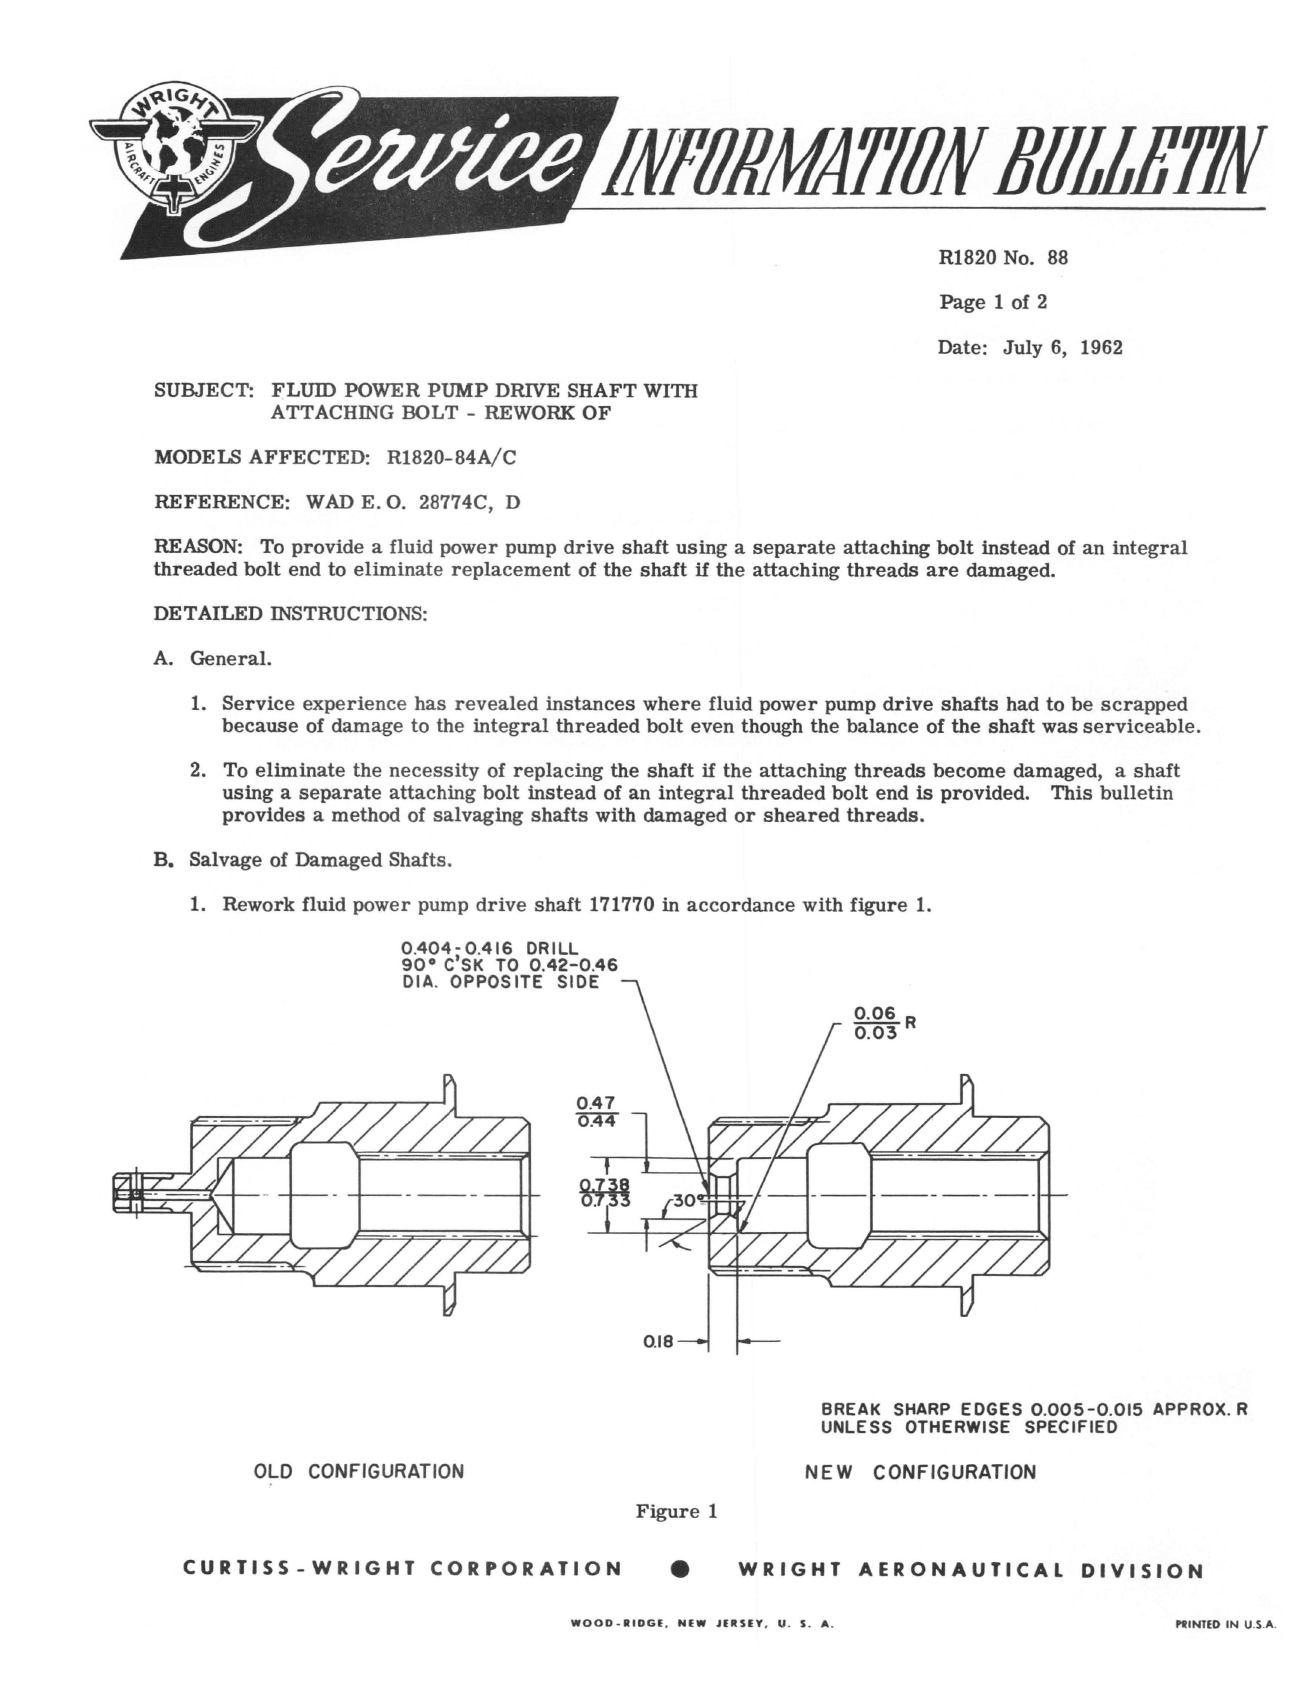 Sample page 1 from AirCorps Library document: Rework of Fluid Power Pump Drive Shaft with Attaching Bolt